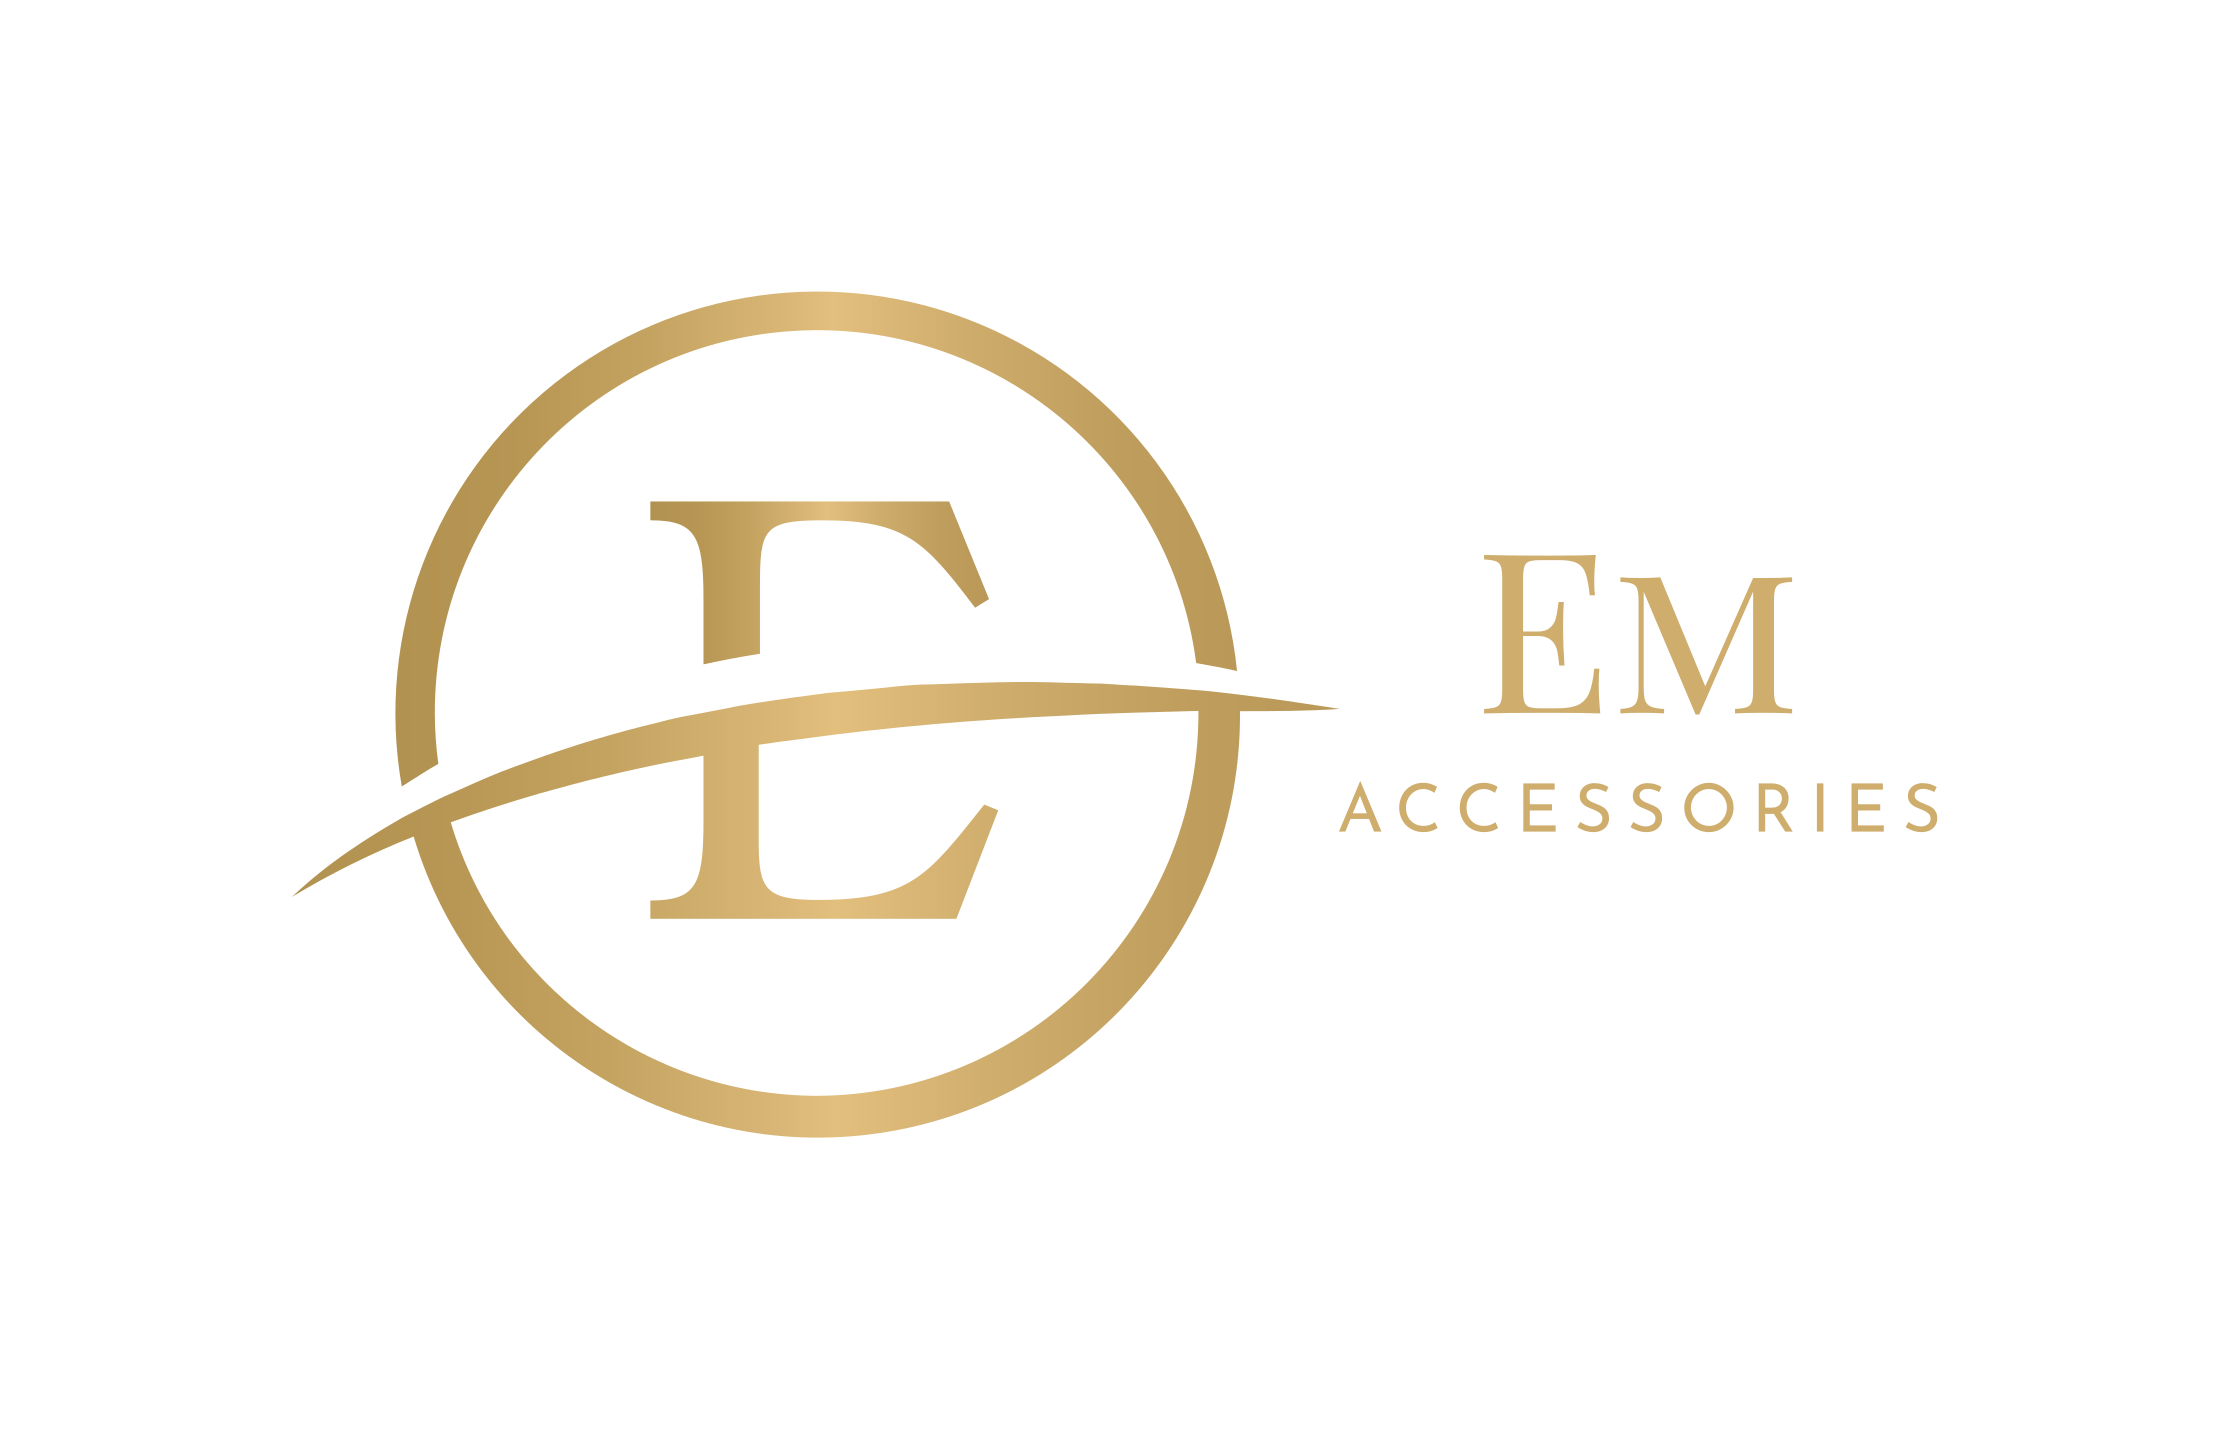 em accessories logo online shop jewellery and accessories